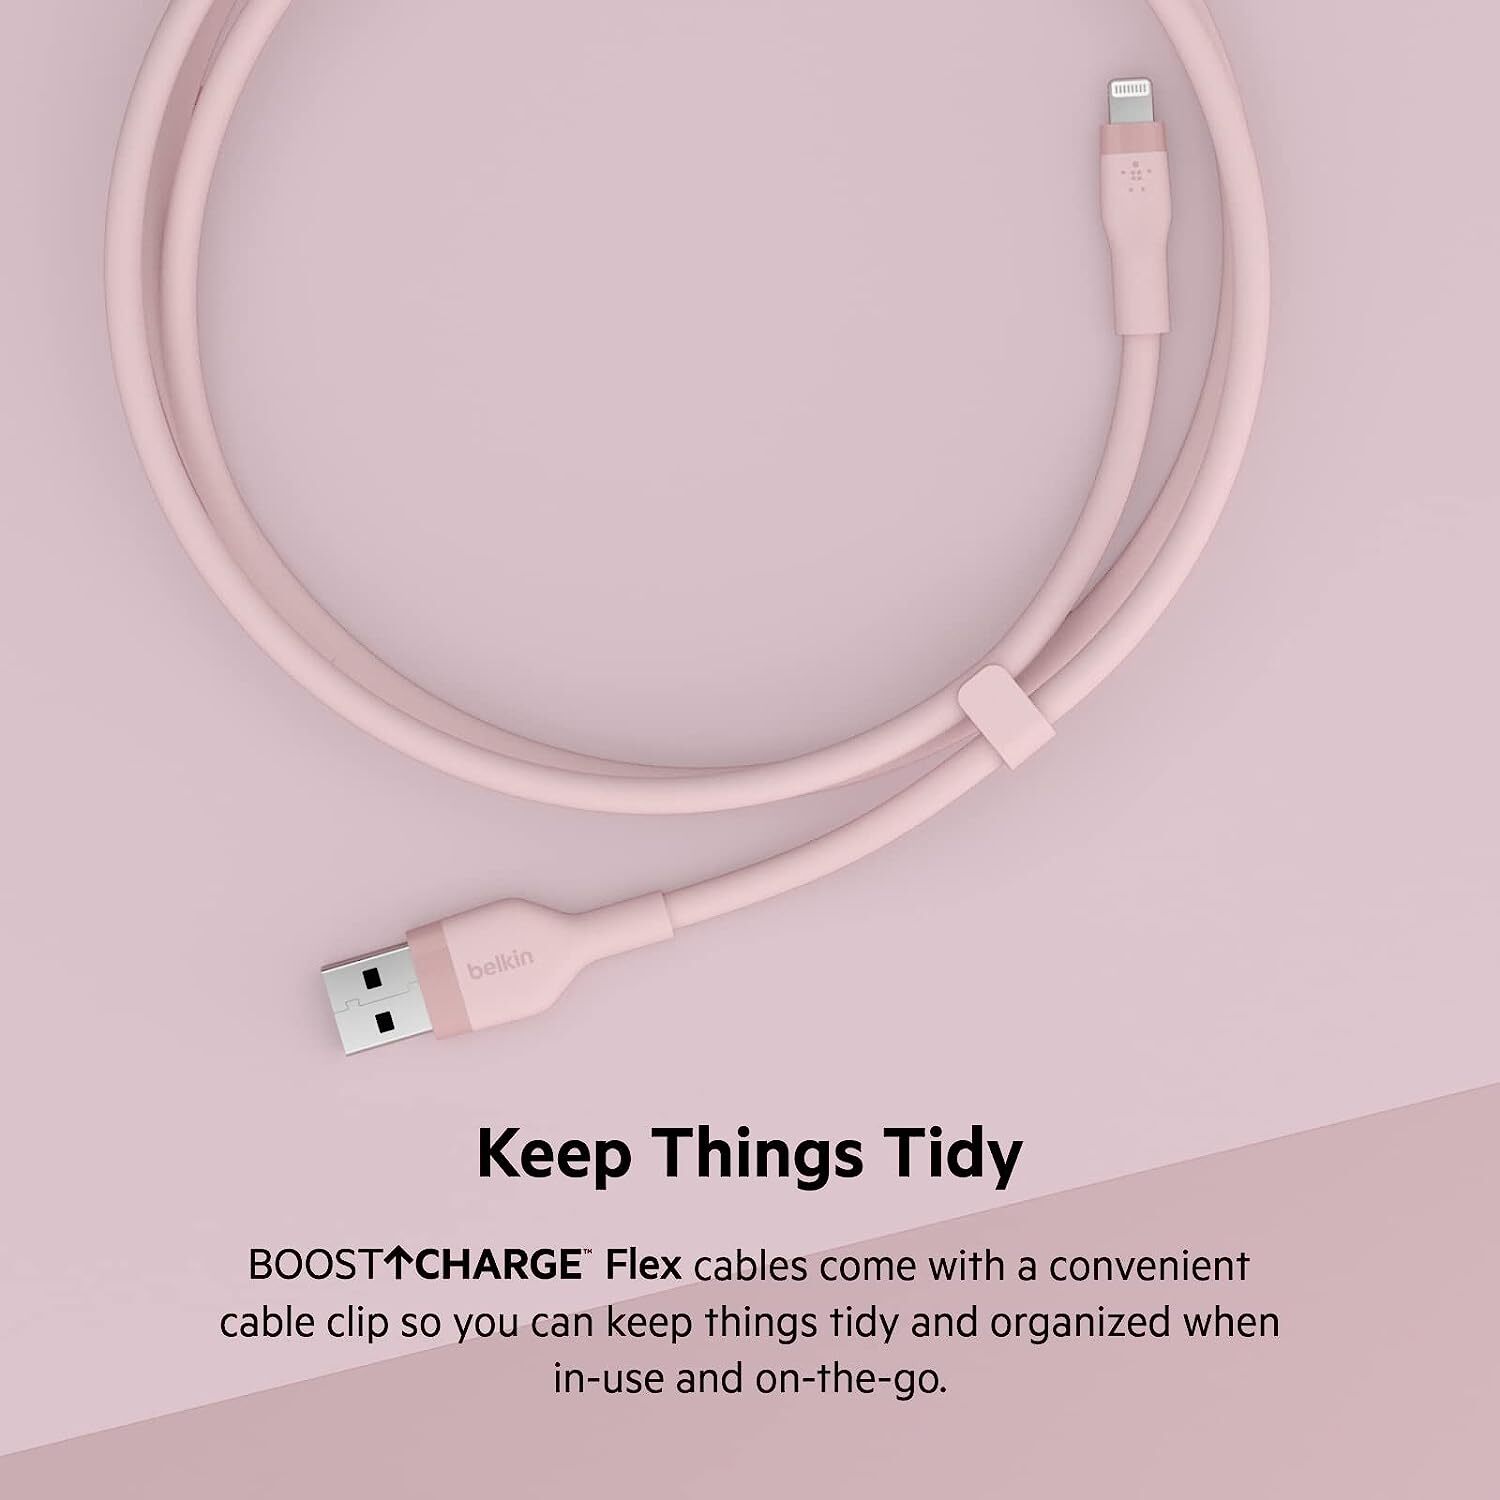 Belkin Apple Certified Lightning to USB Charge and Sync Flexible Silicone Cable for iPhone, iPad, Air Pods, 3.3 feet (1 meters) – Pink